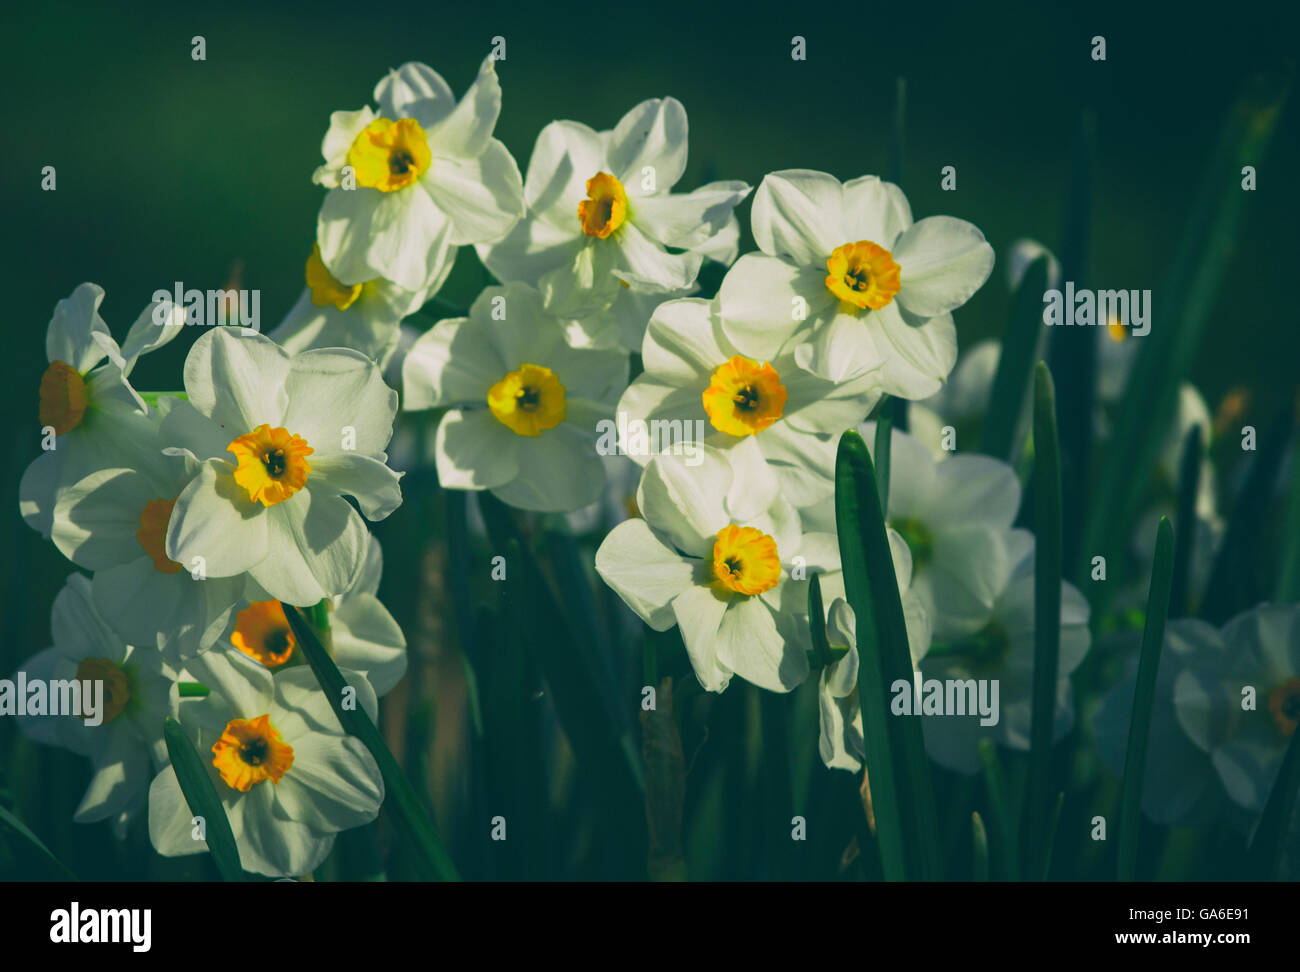 A cluster of daffodils in the Springtime. Stock Photo